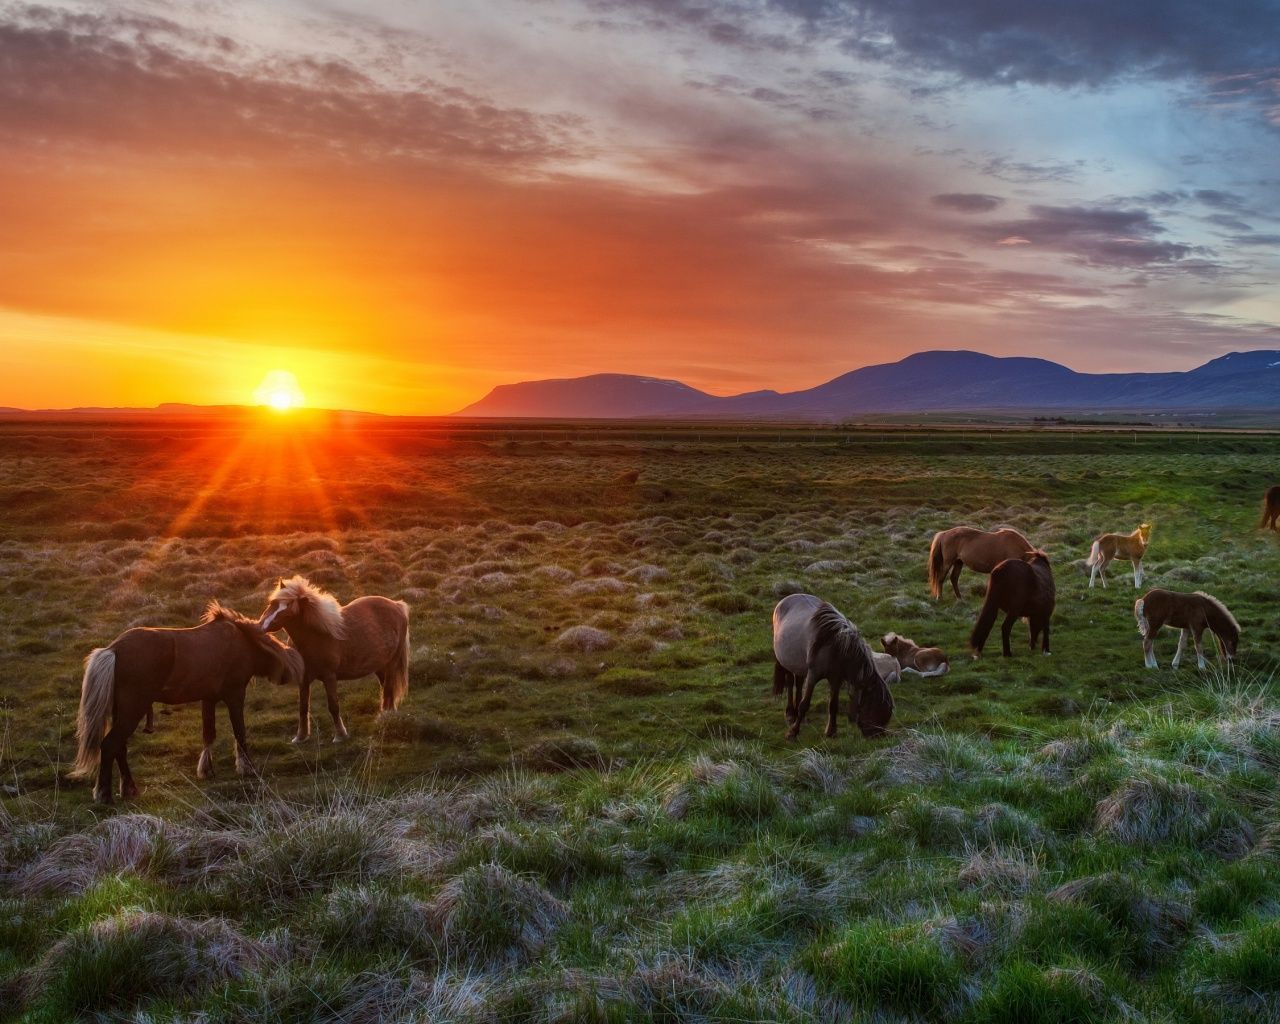 Sunset And Wild Horses Eating Grass. Horse background, Horses, Horse picture